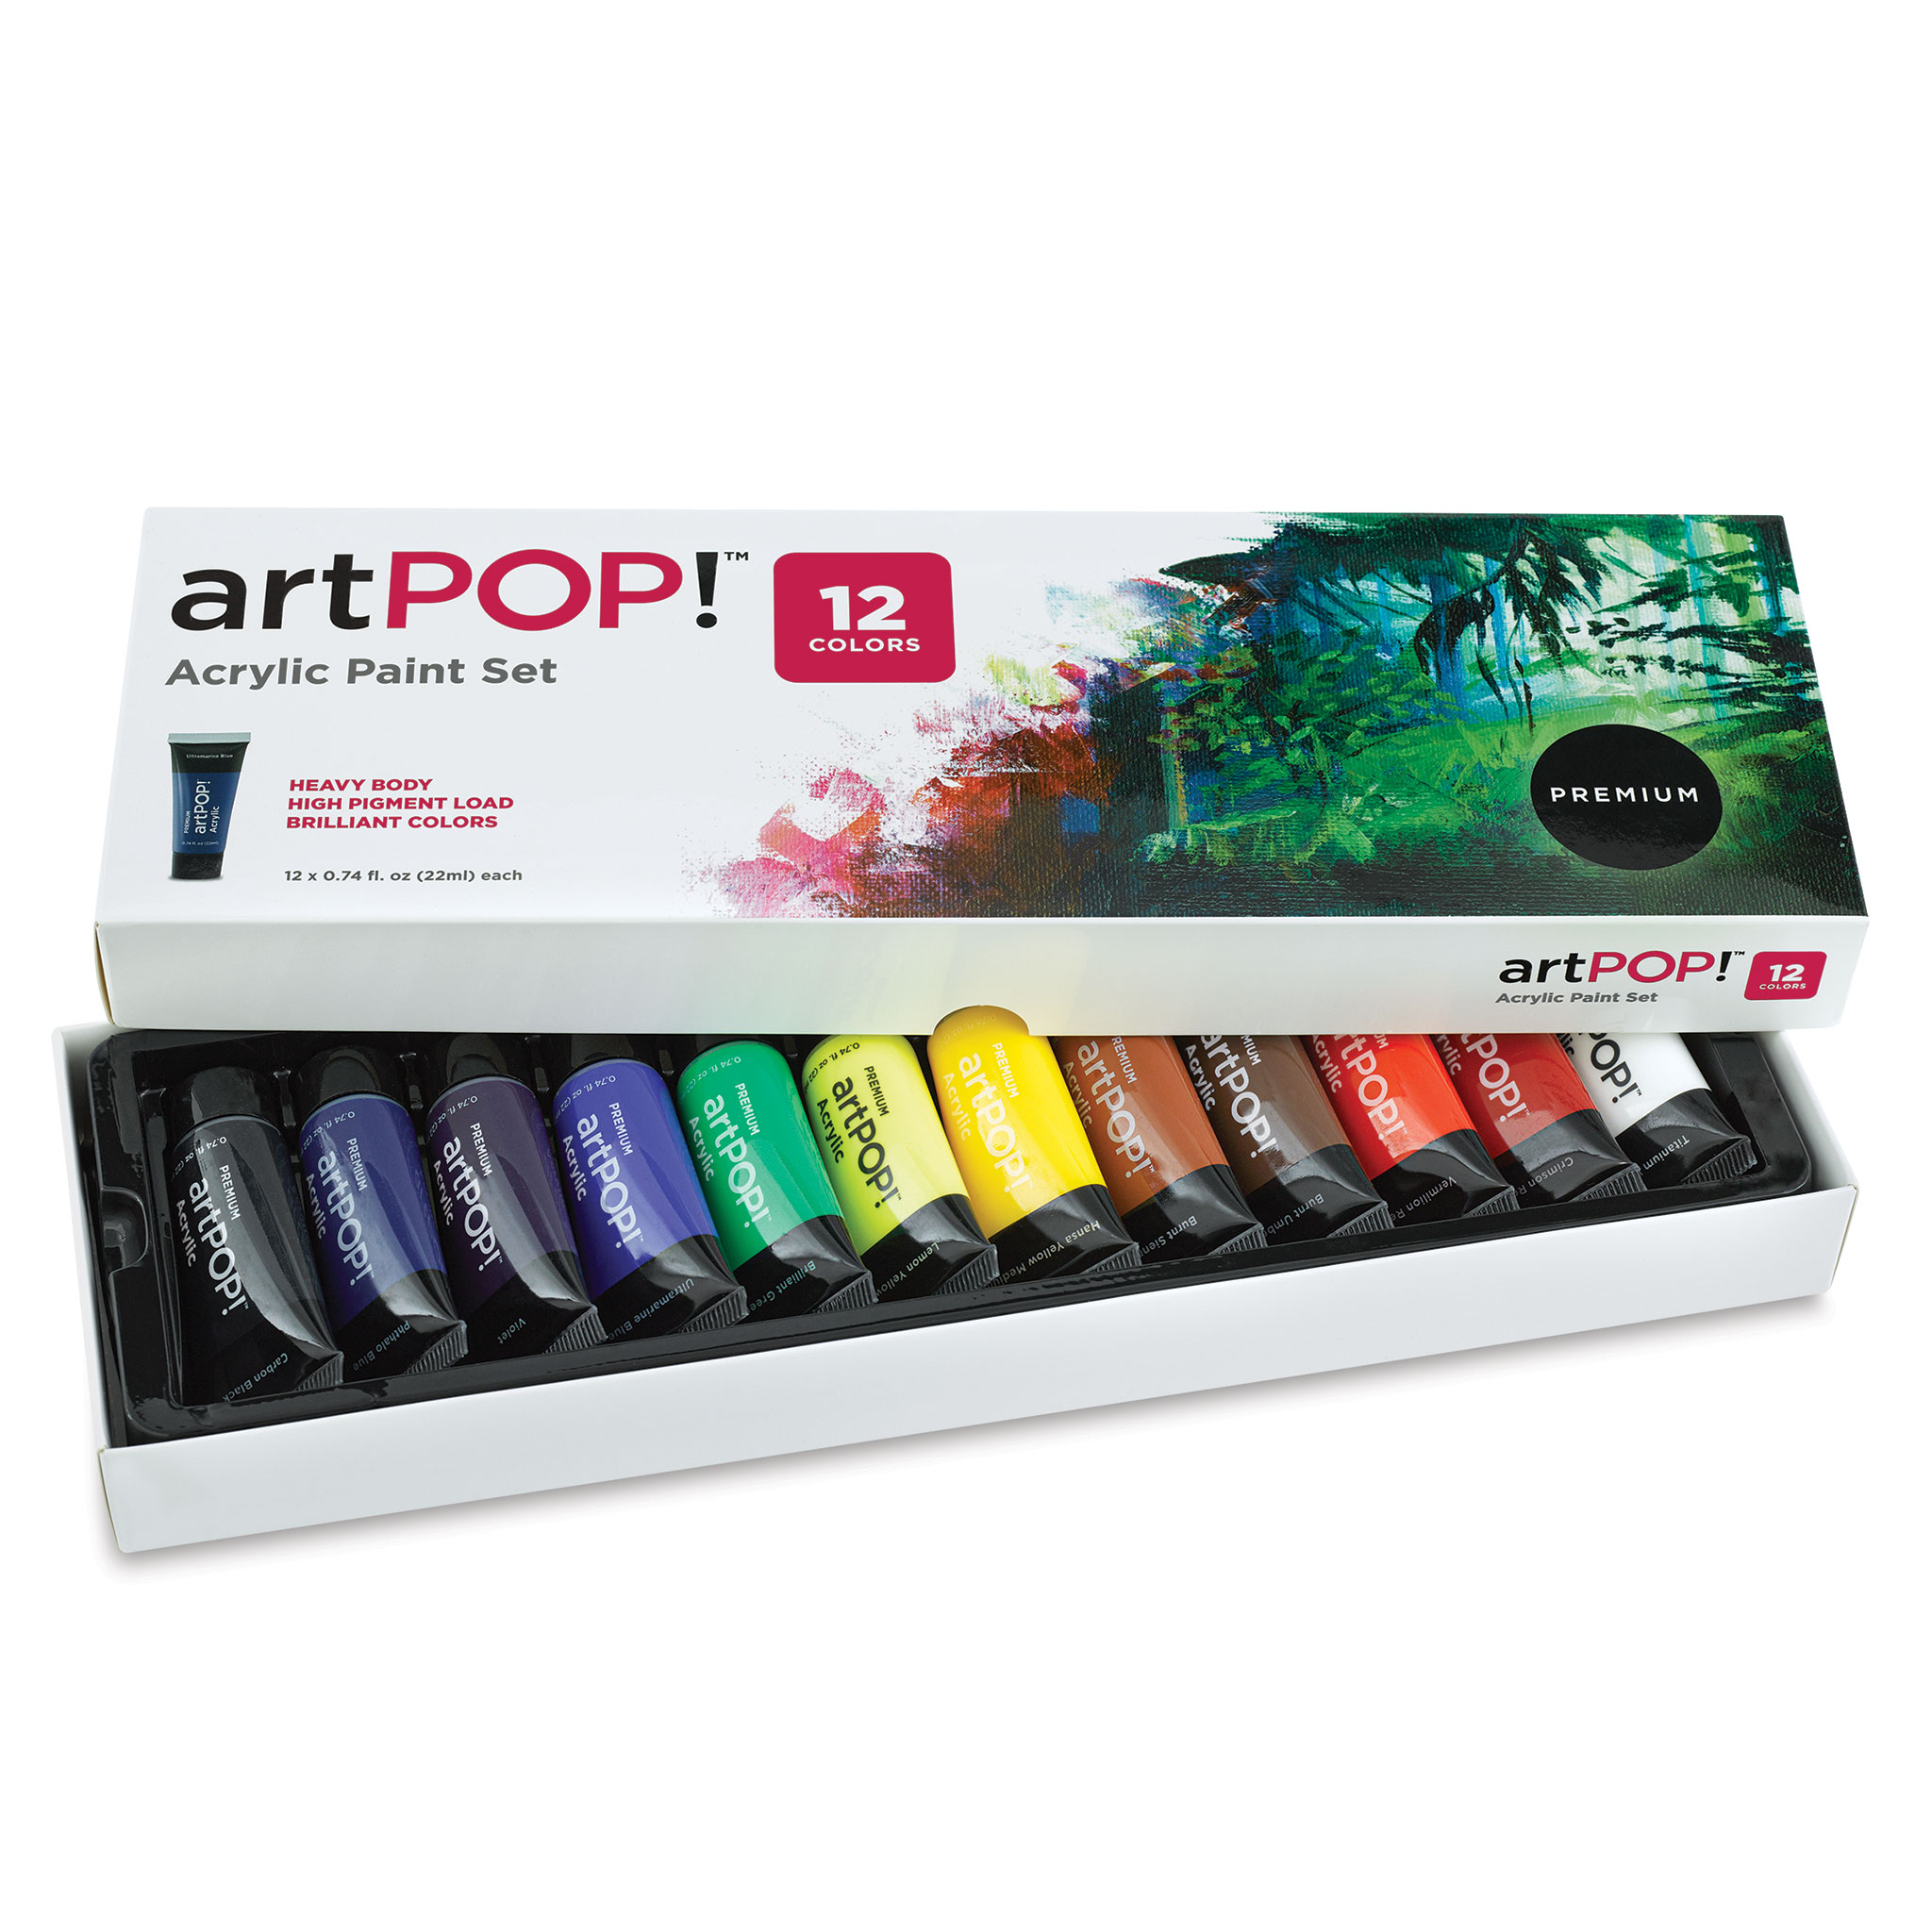 Acrylic Paint Sets for sale in New York, New York